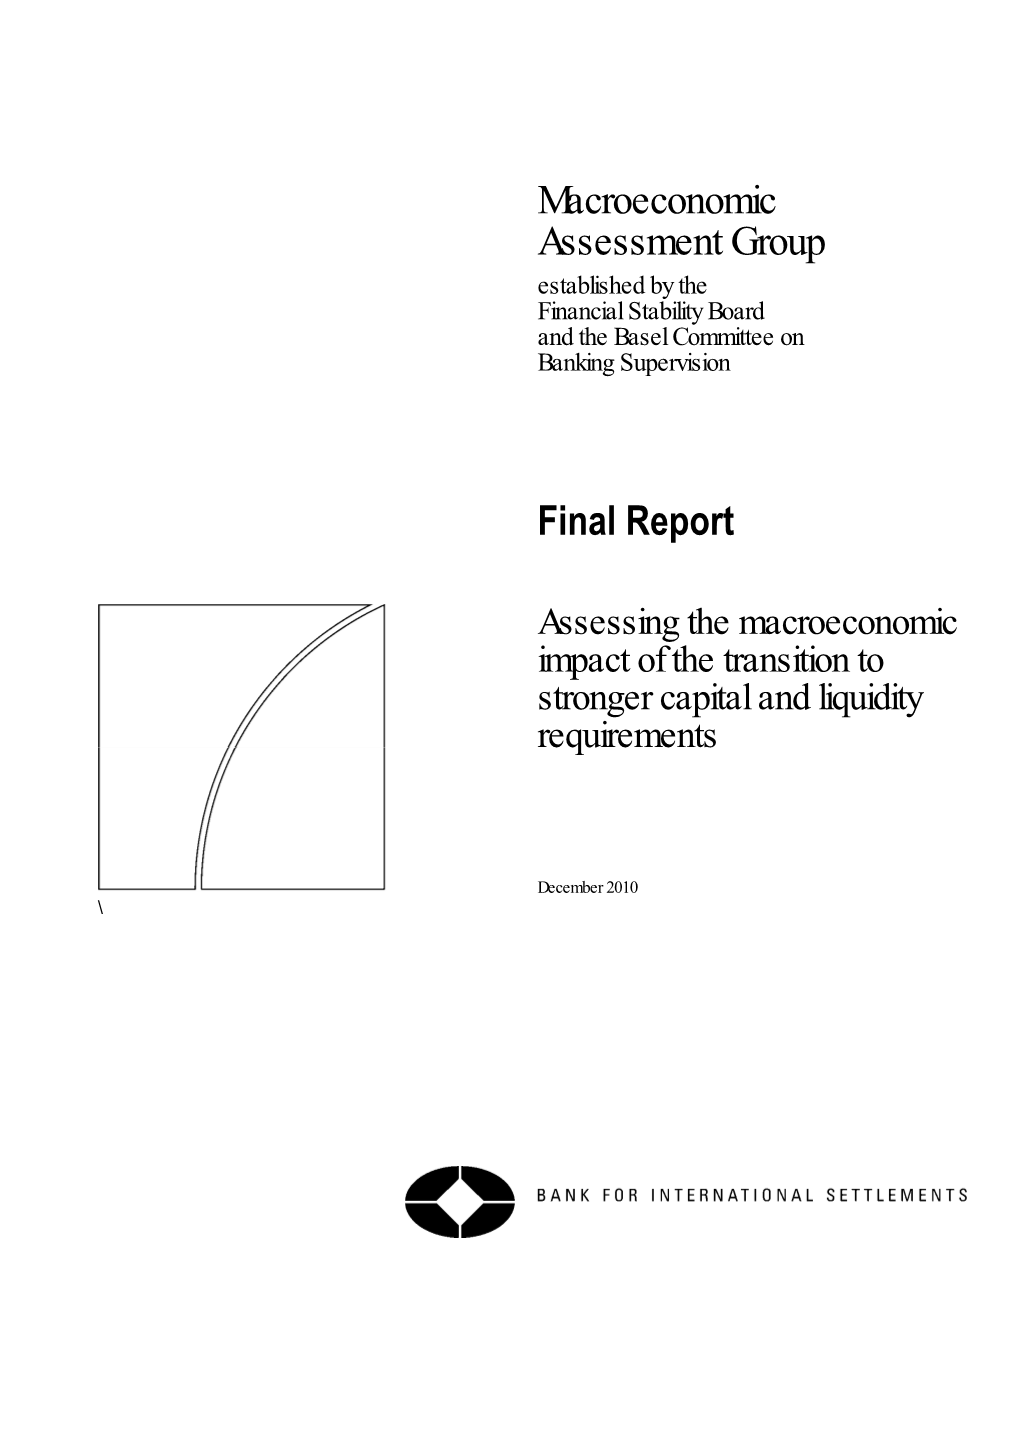 Assessing the Macroeconomic Impact of the Transition to Stronger Capital and Liquidity Requirements